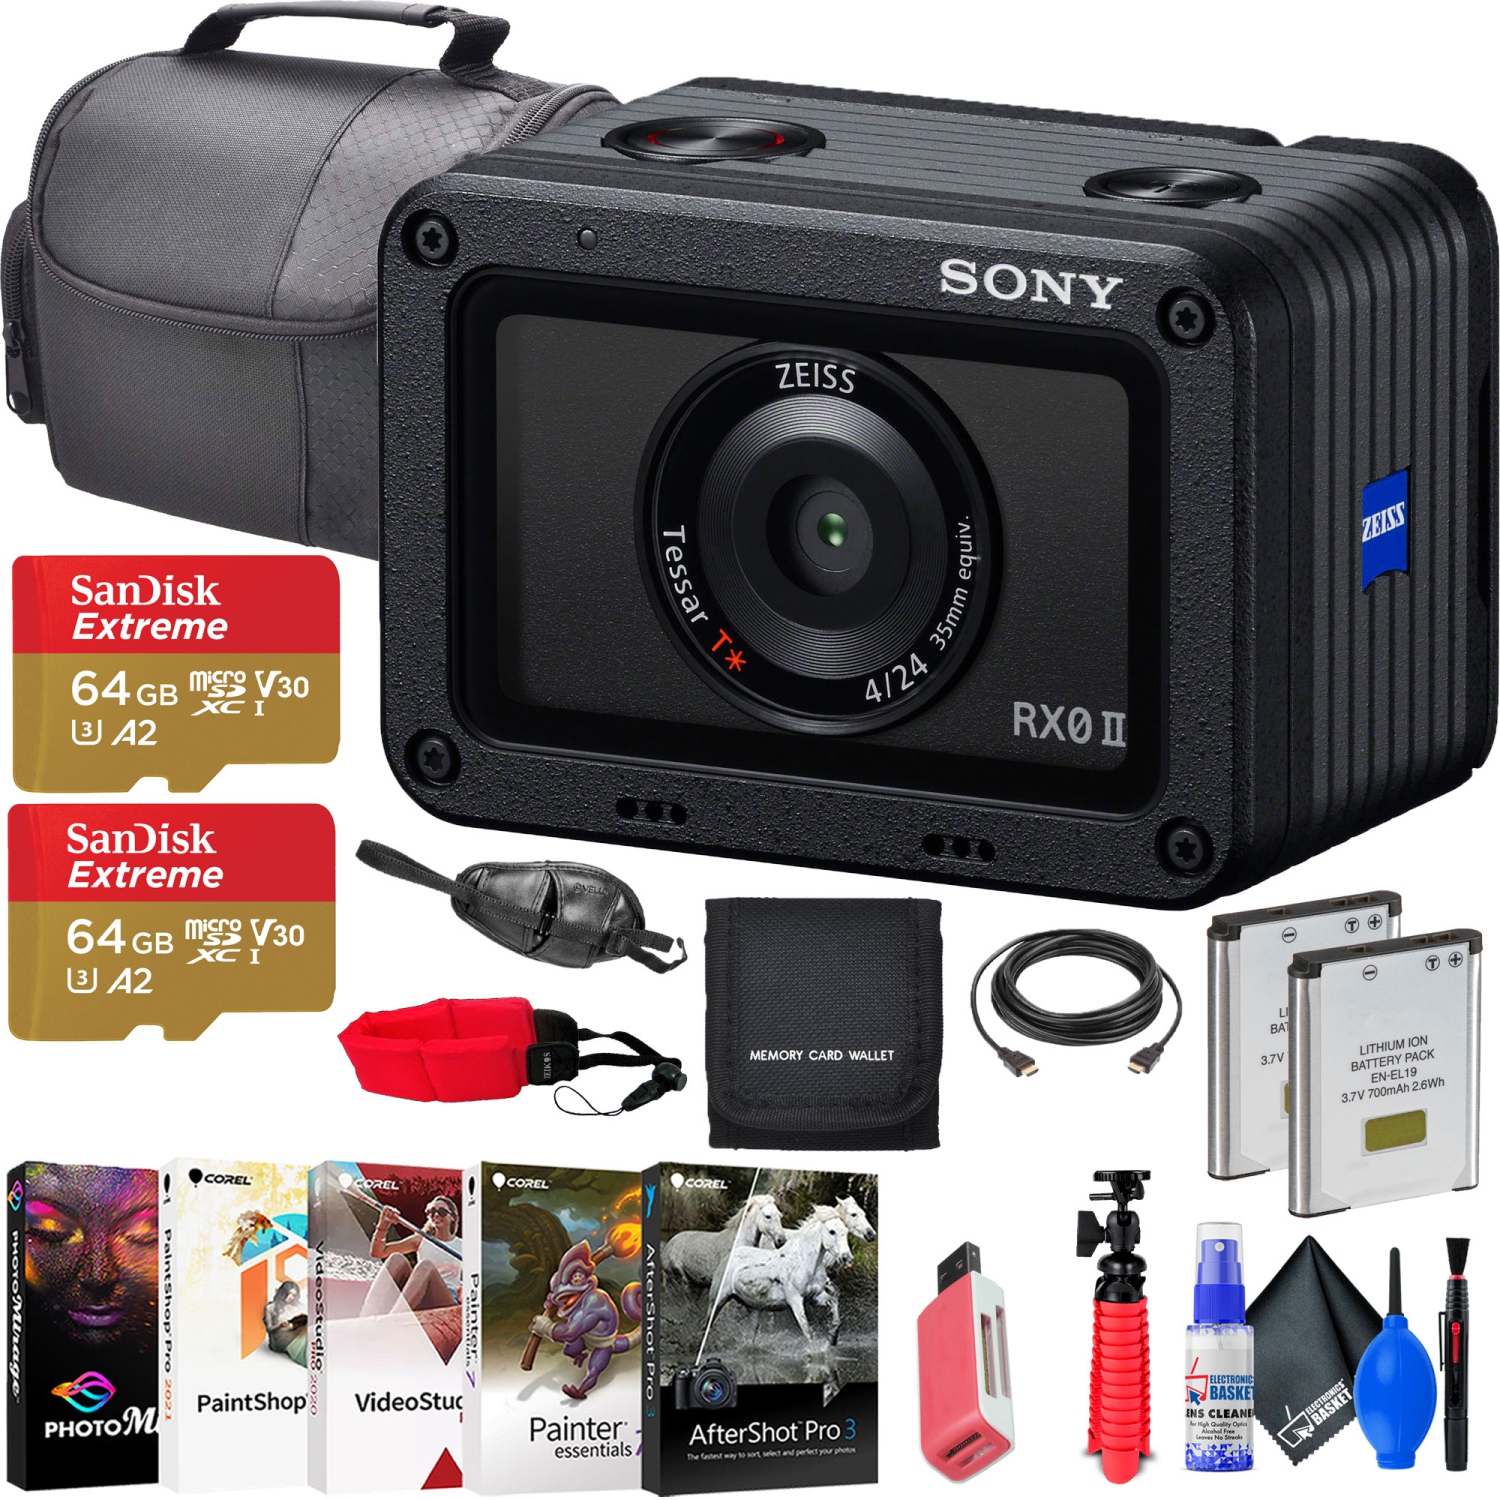 Refurbished (Good) - Sony RX0 Ultra-Compact Waterproof/Shockproof Camera + 2 x 64GB Card + More